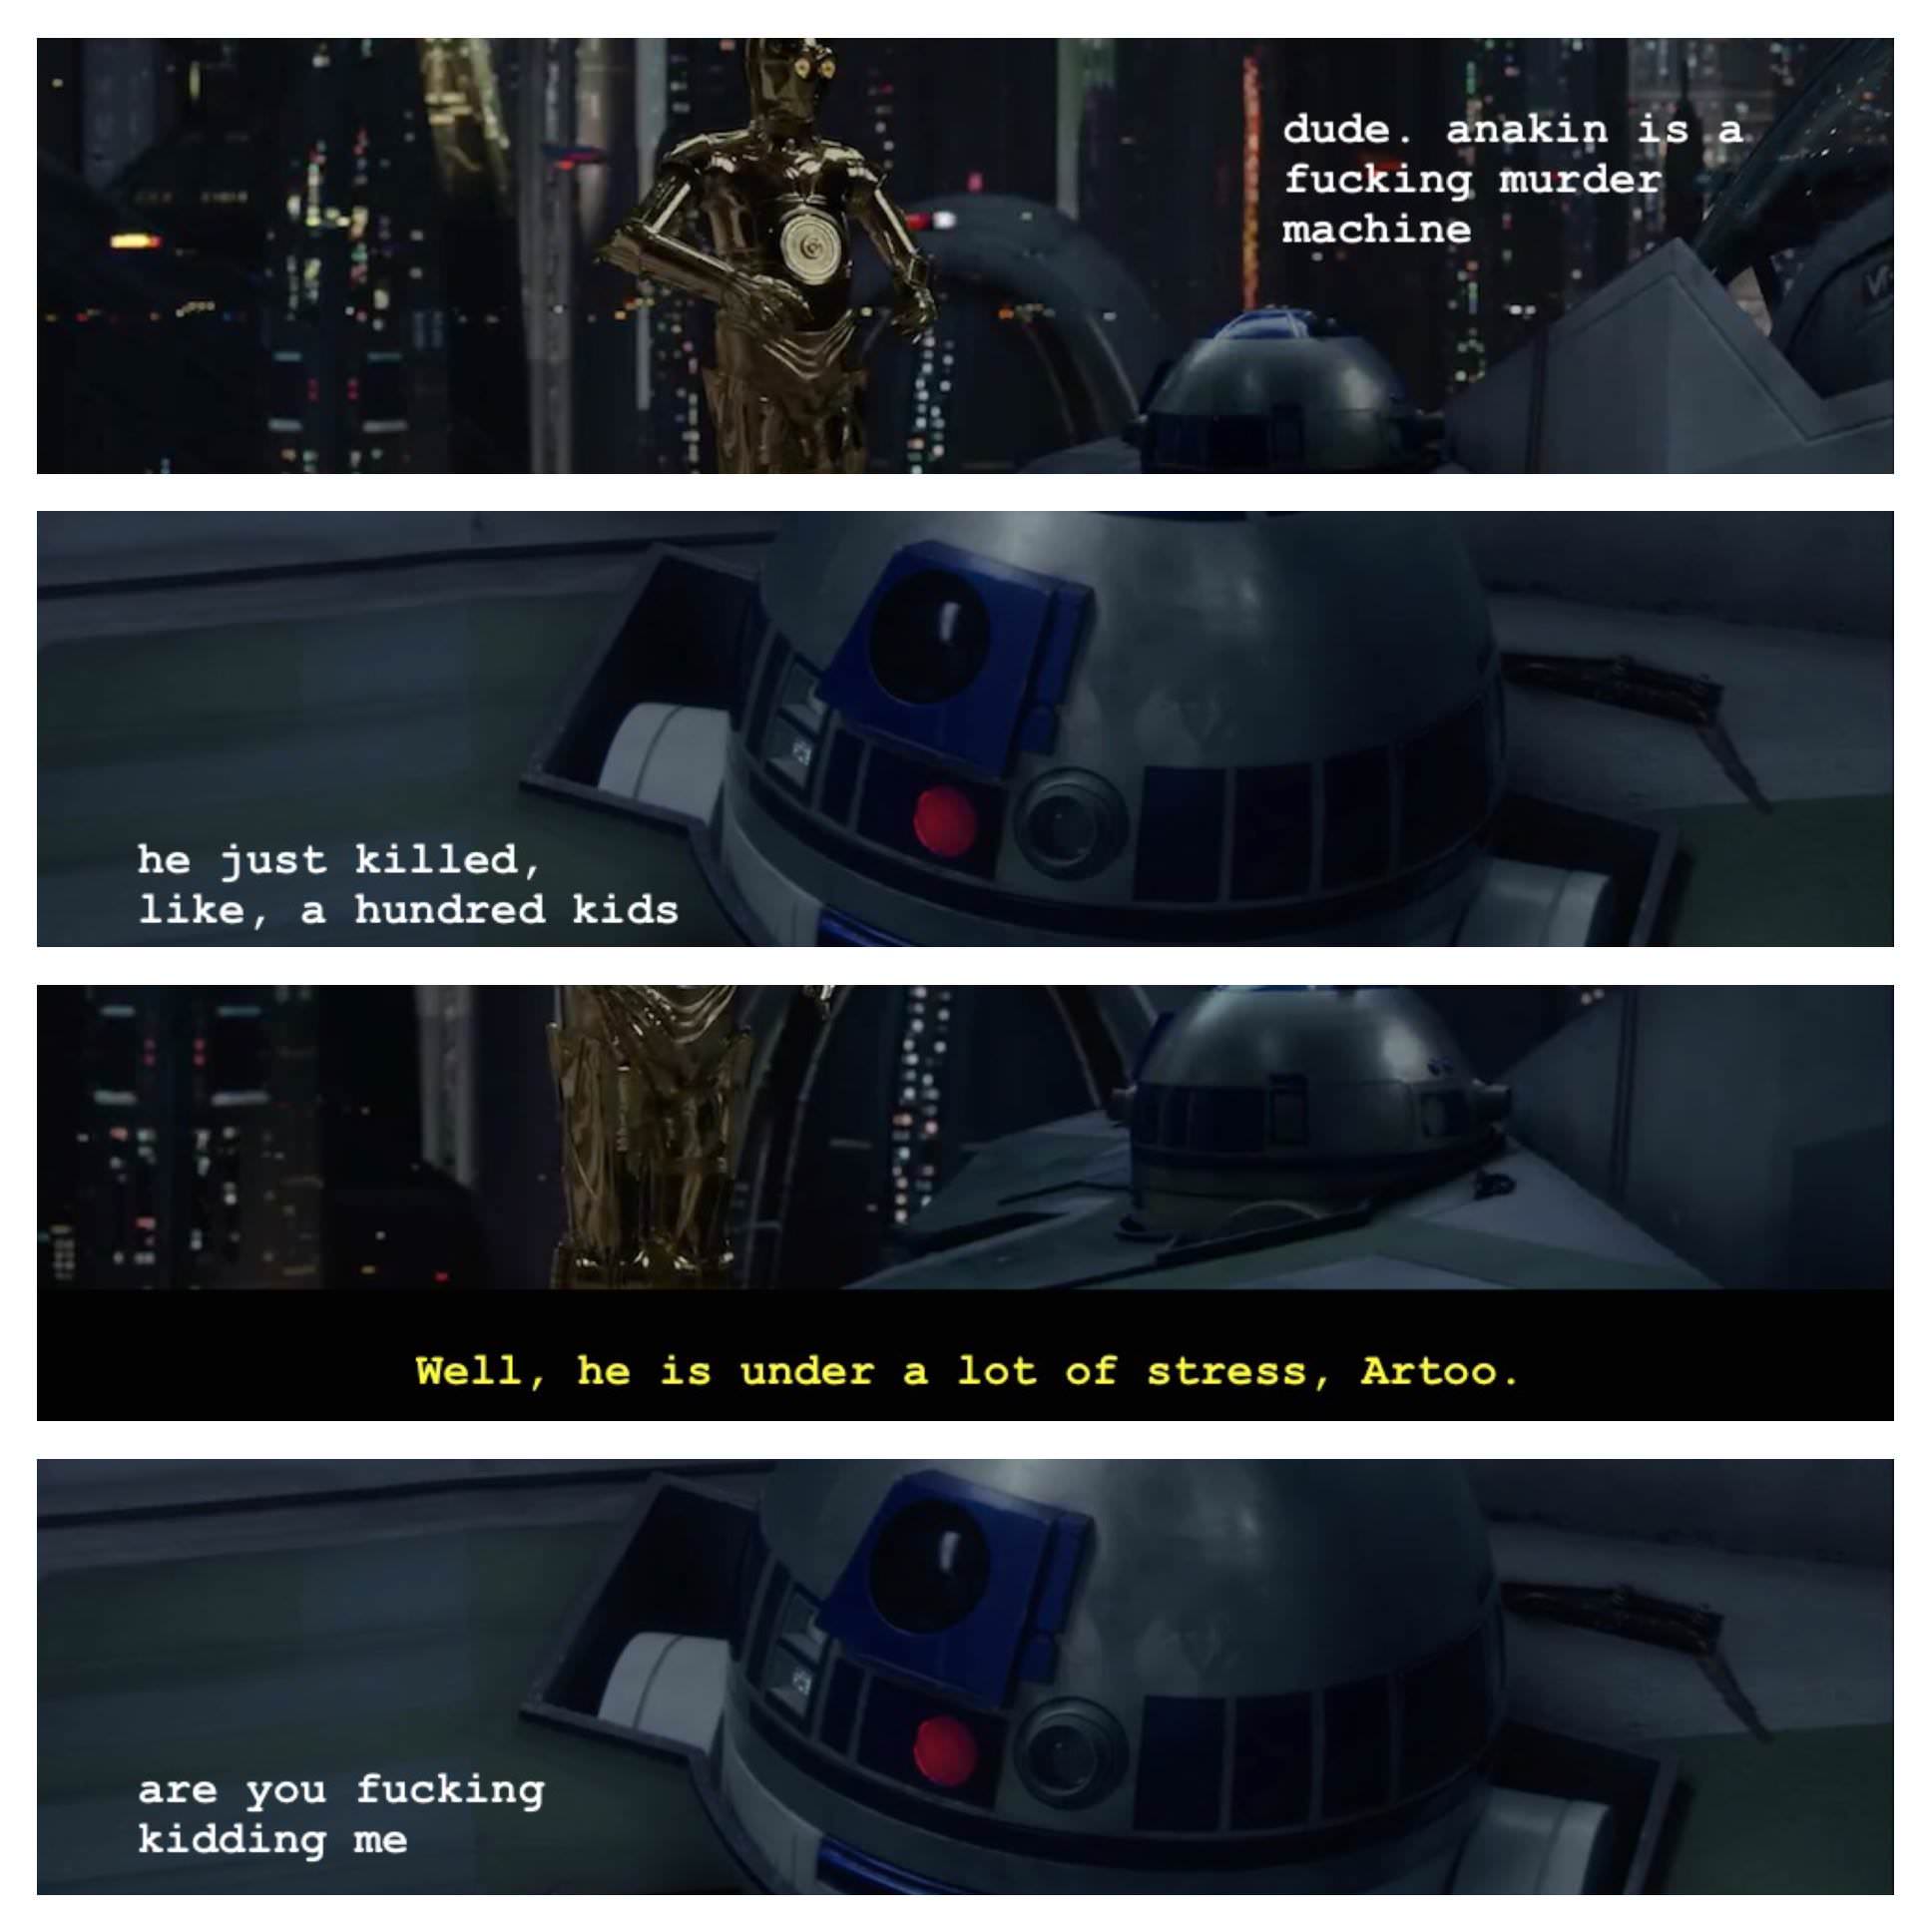 r2d2 revenge of the sith - dude. anakin is fucking murder machine he just killed, , a hundred kids Well, he is under a lot of stress, Artoo. are you fucking kidding me